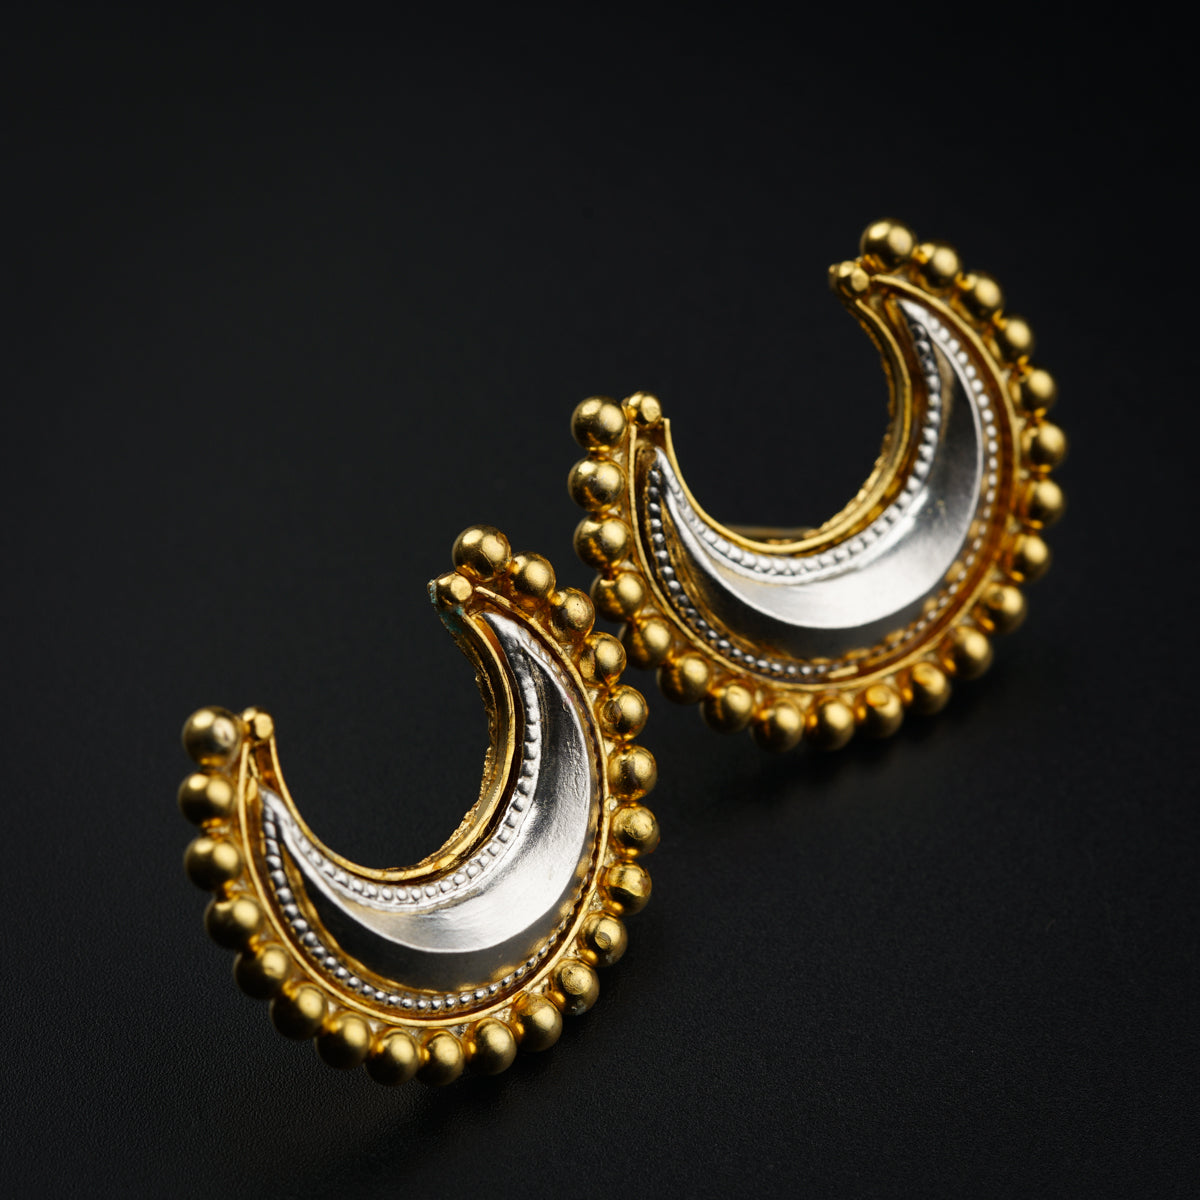 a pair of gold and silver earrings on a black background